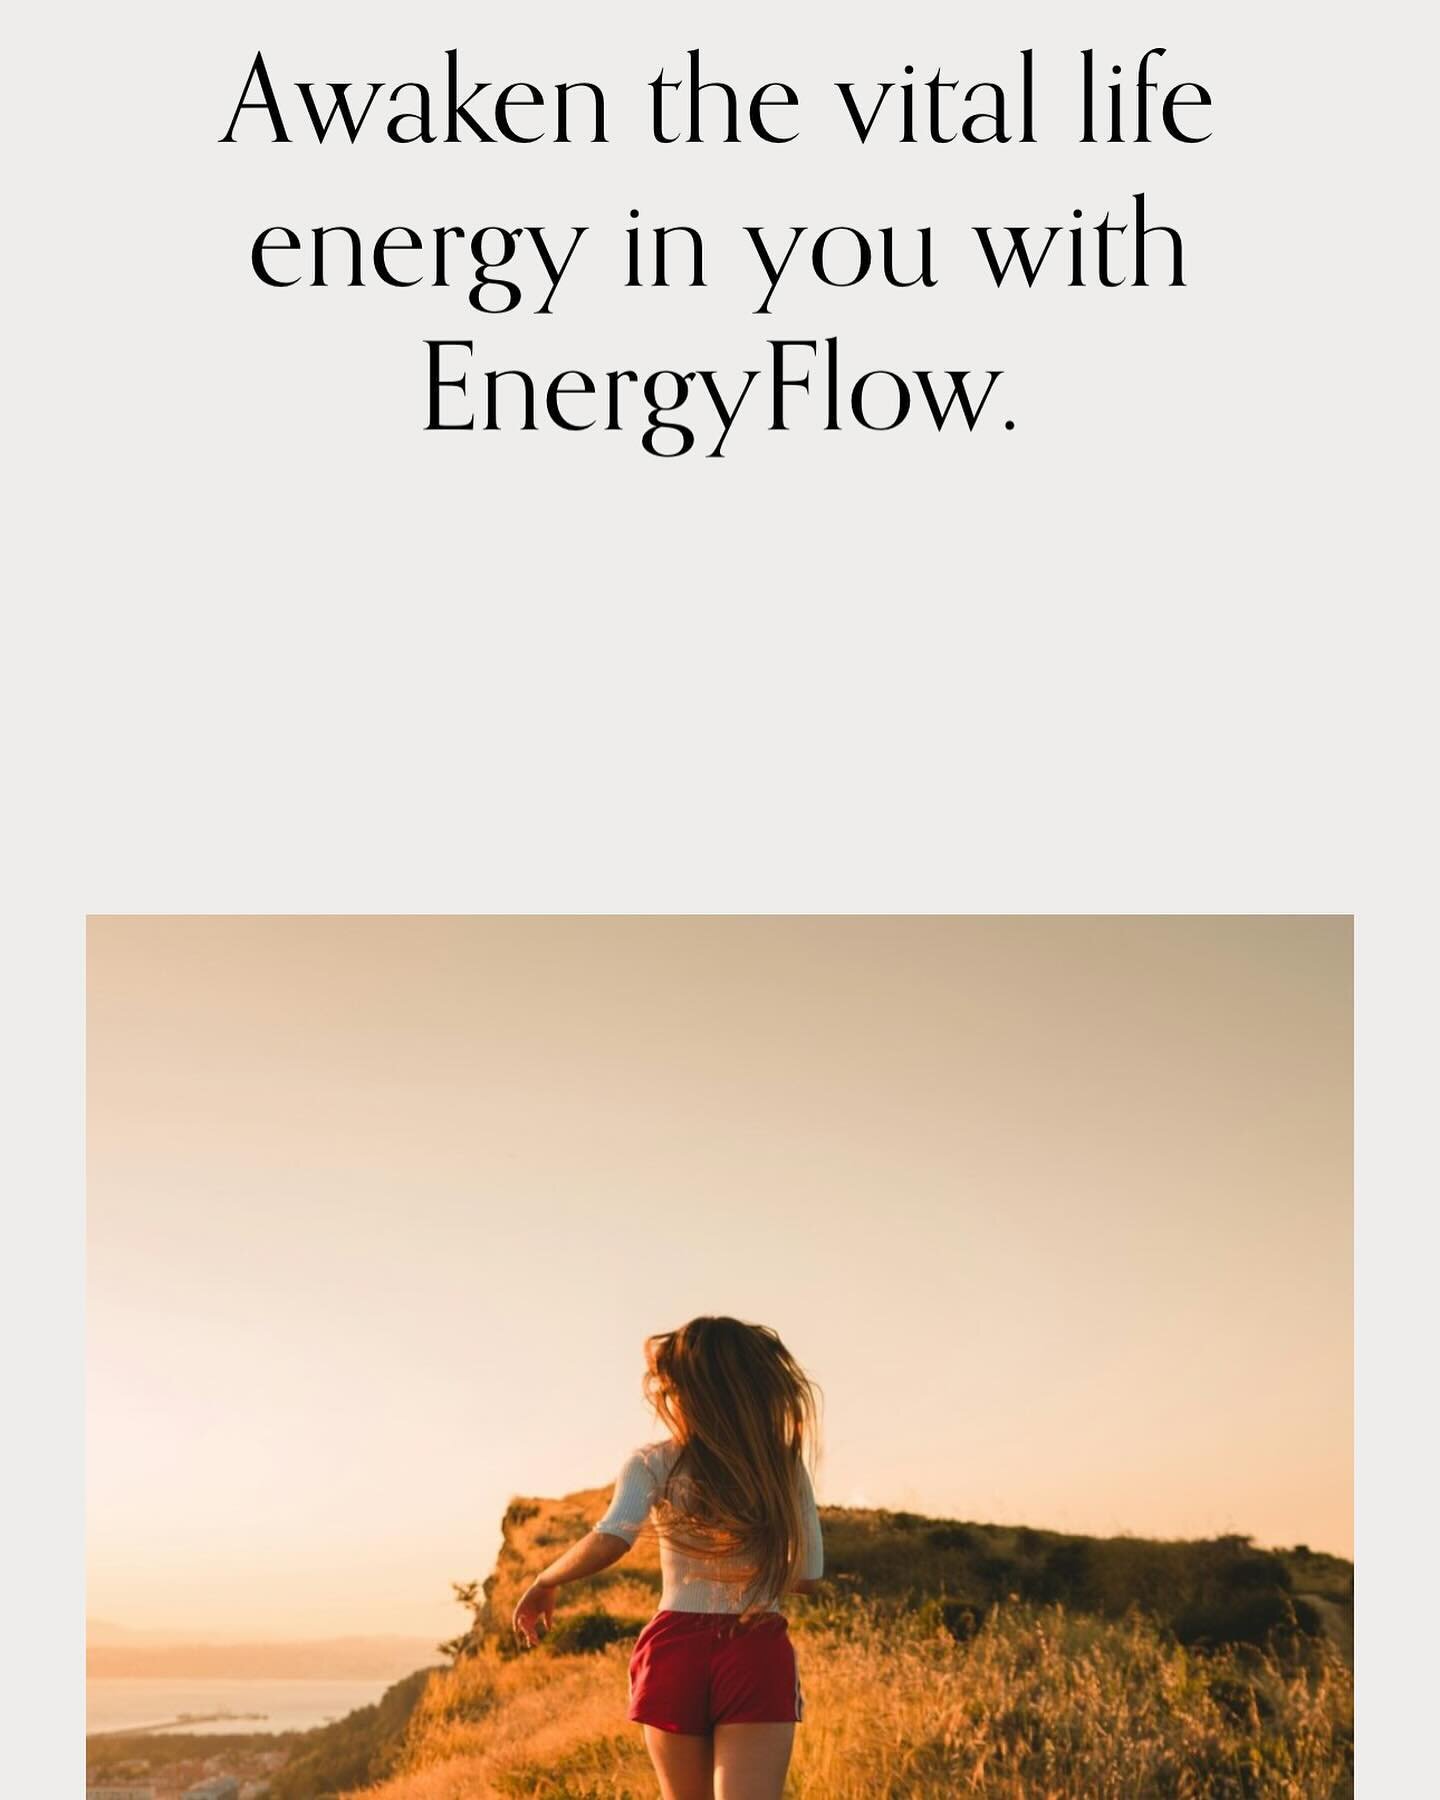 Now you can schedule individual and group sessions directly on the site. Link in the bio venergyflow.com